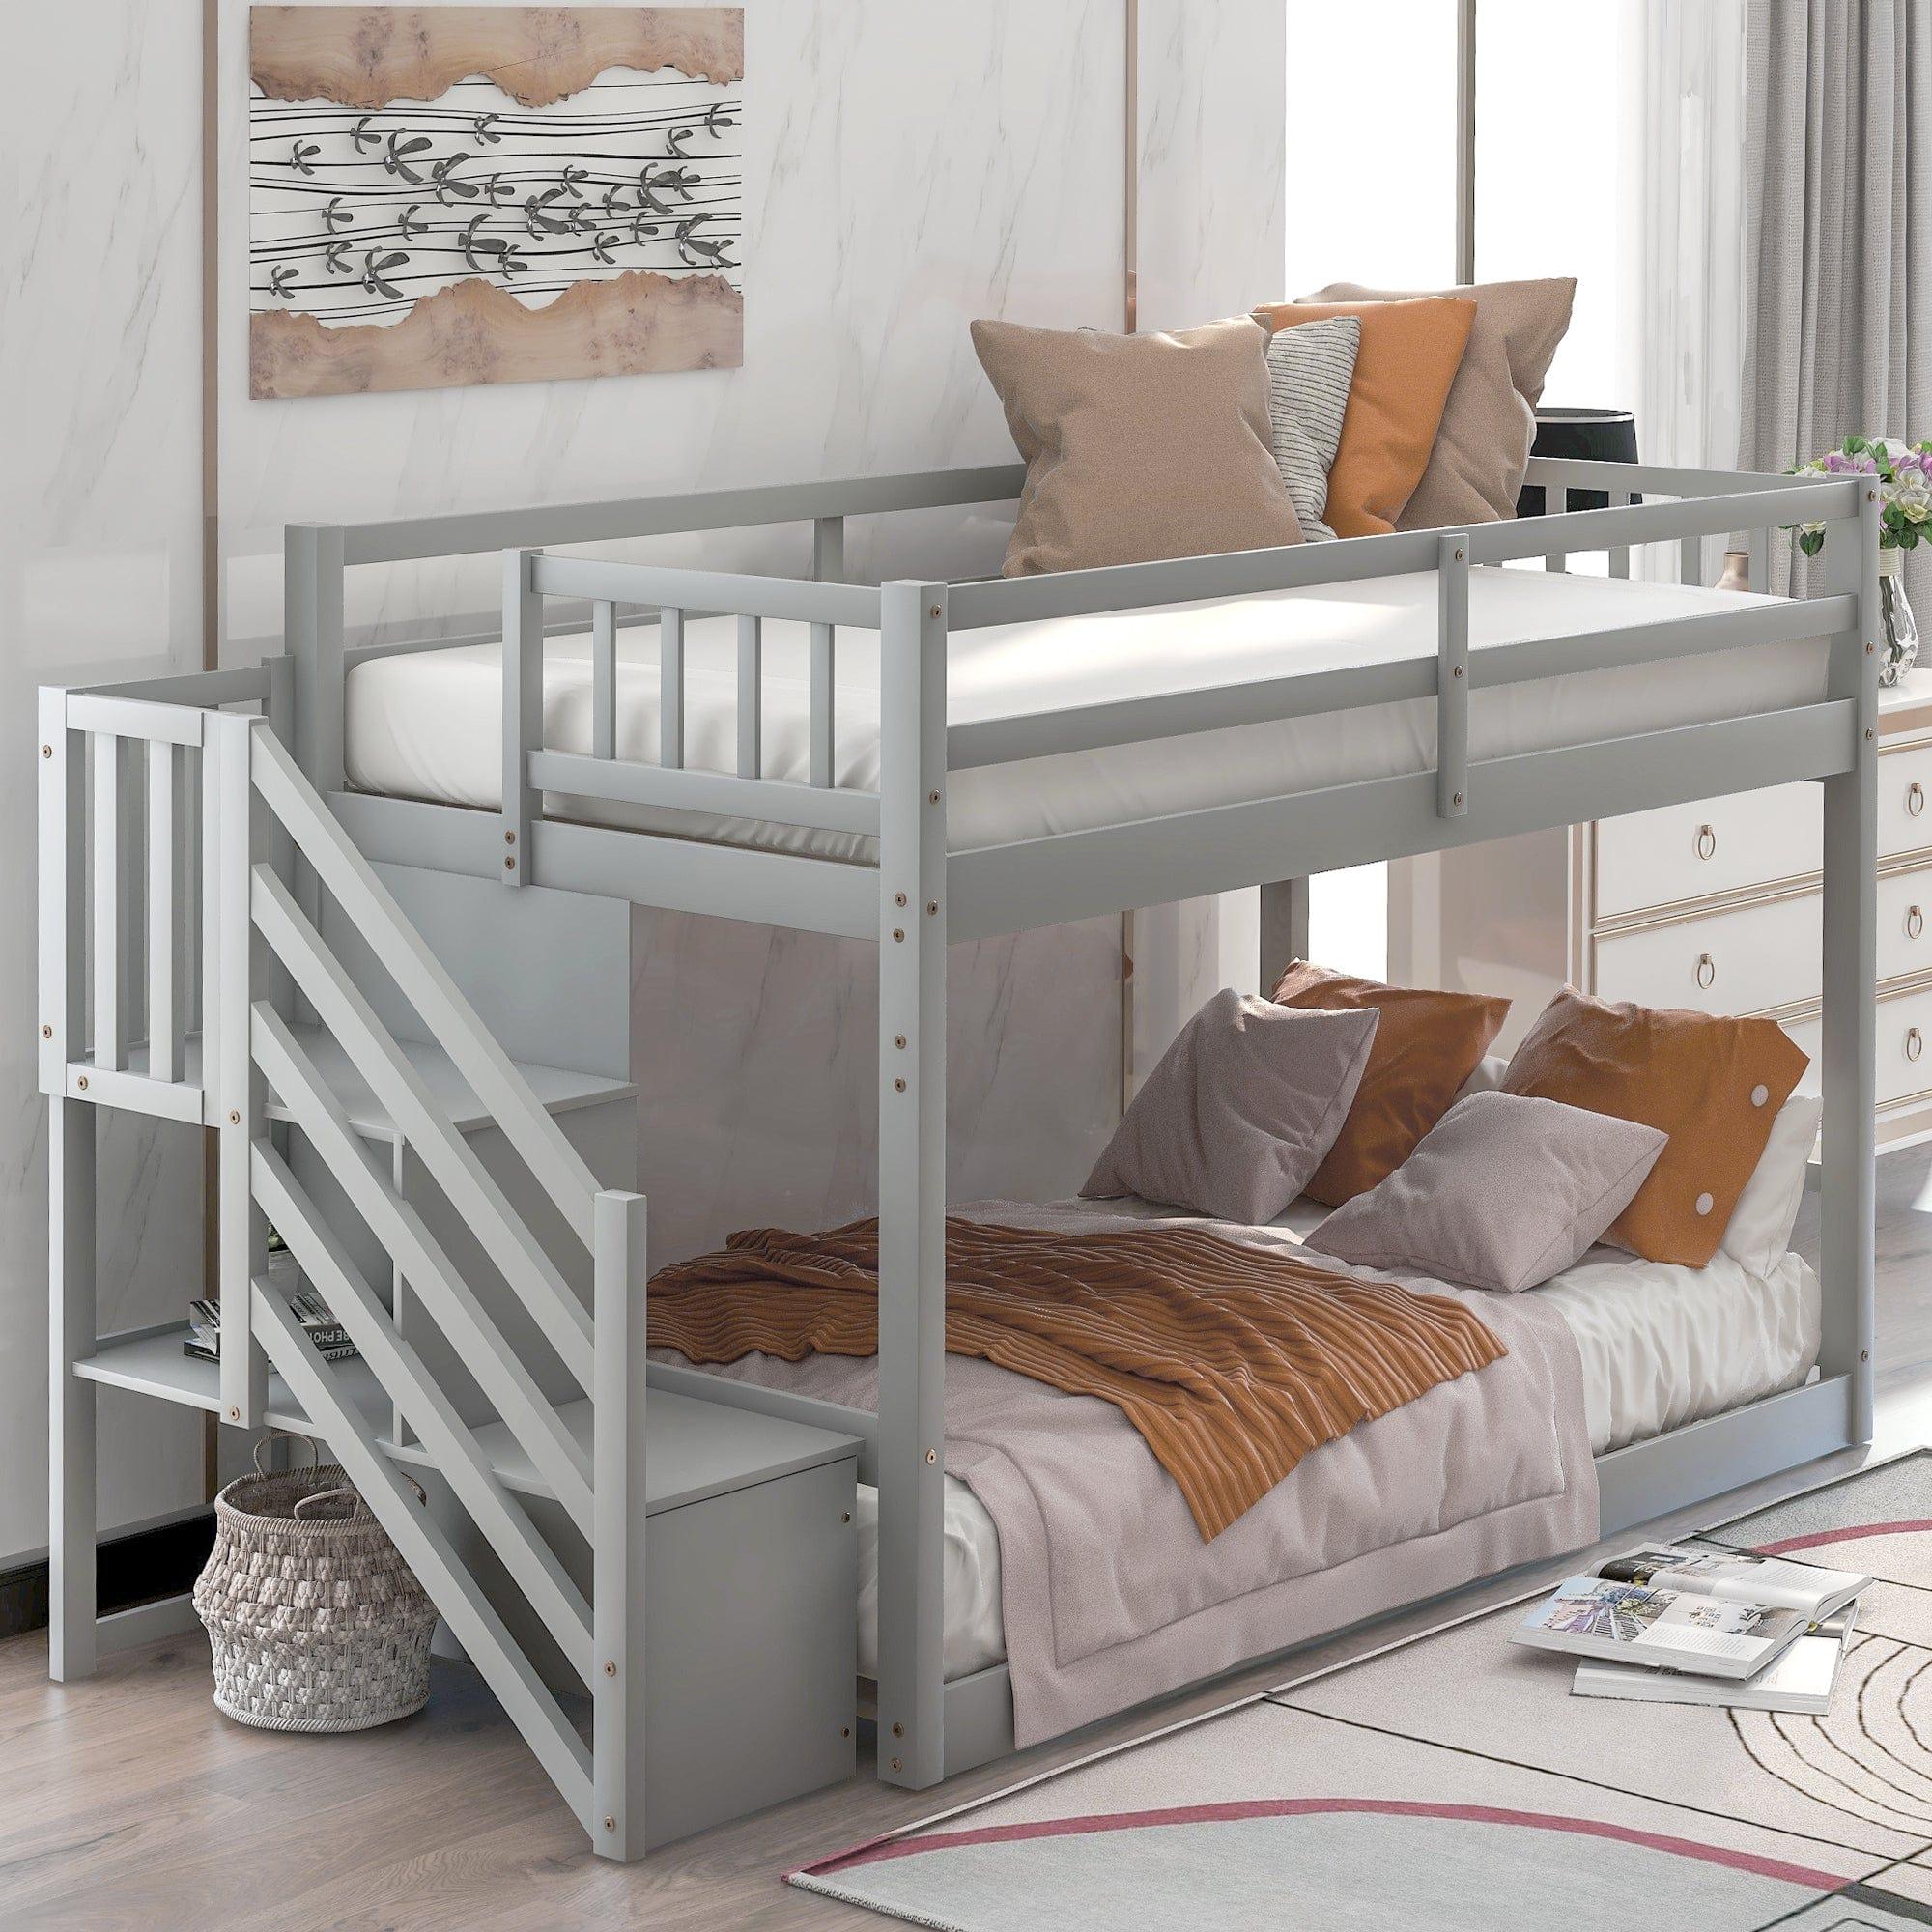 Shop Astro Bunk Bed - Twin Mademoiselle Home Decor